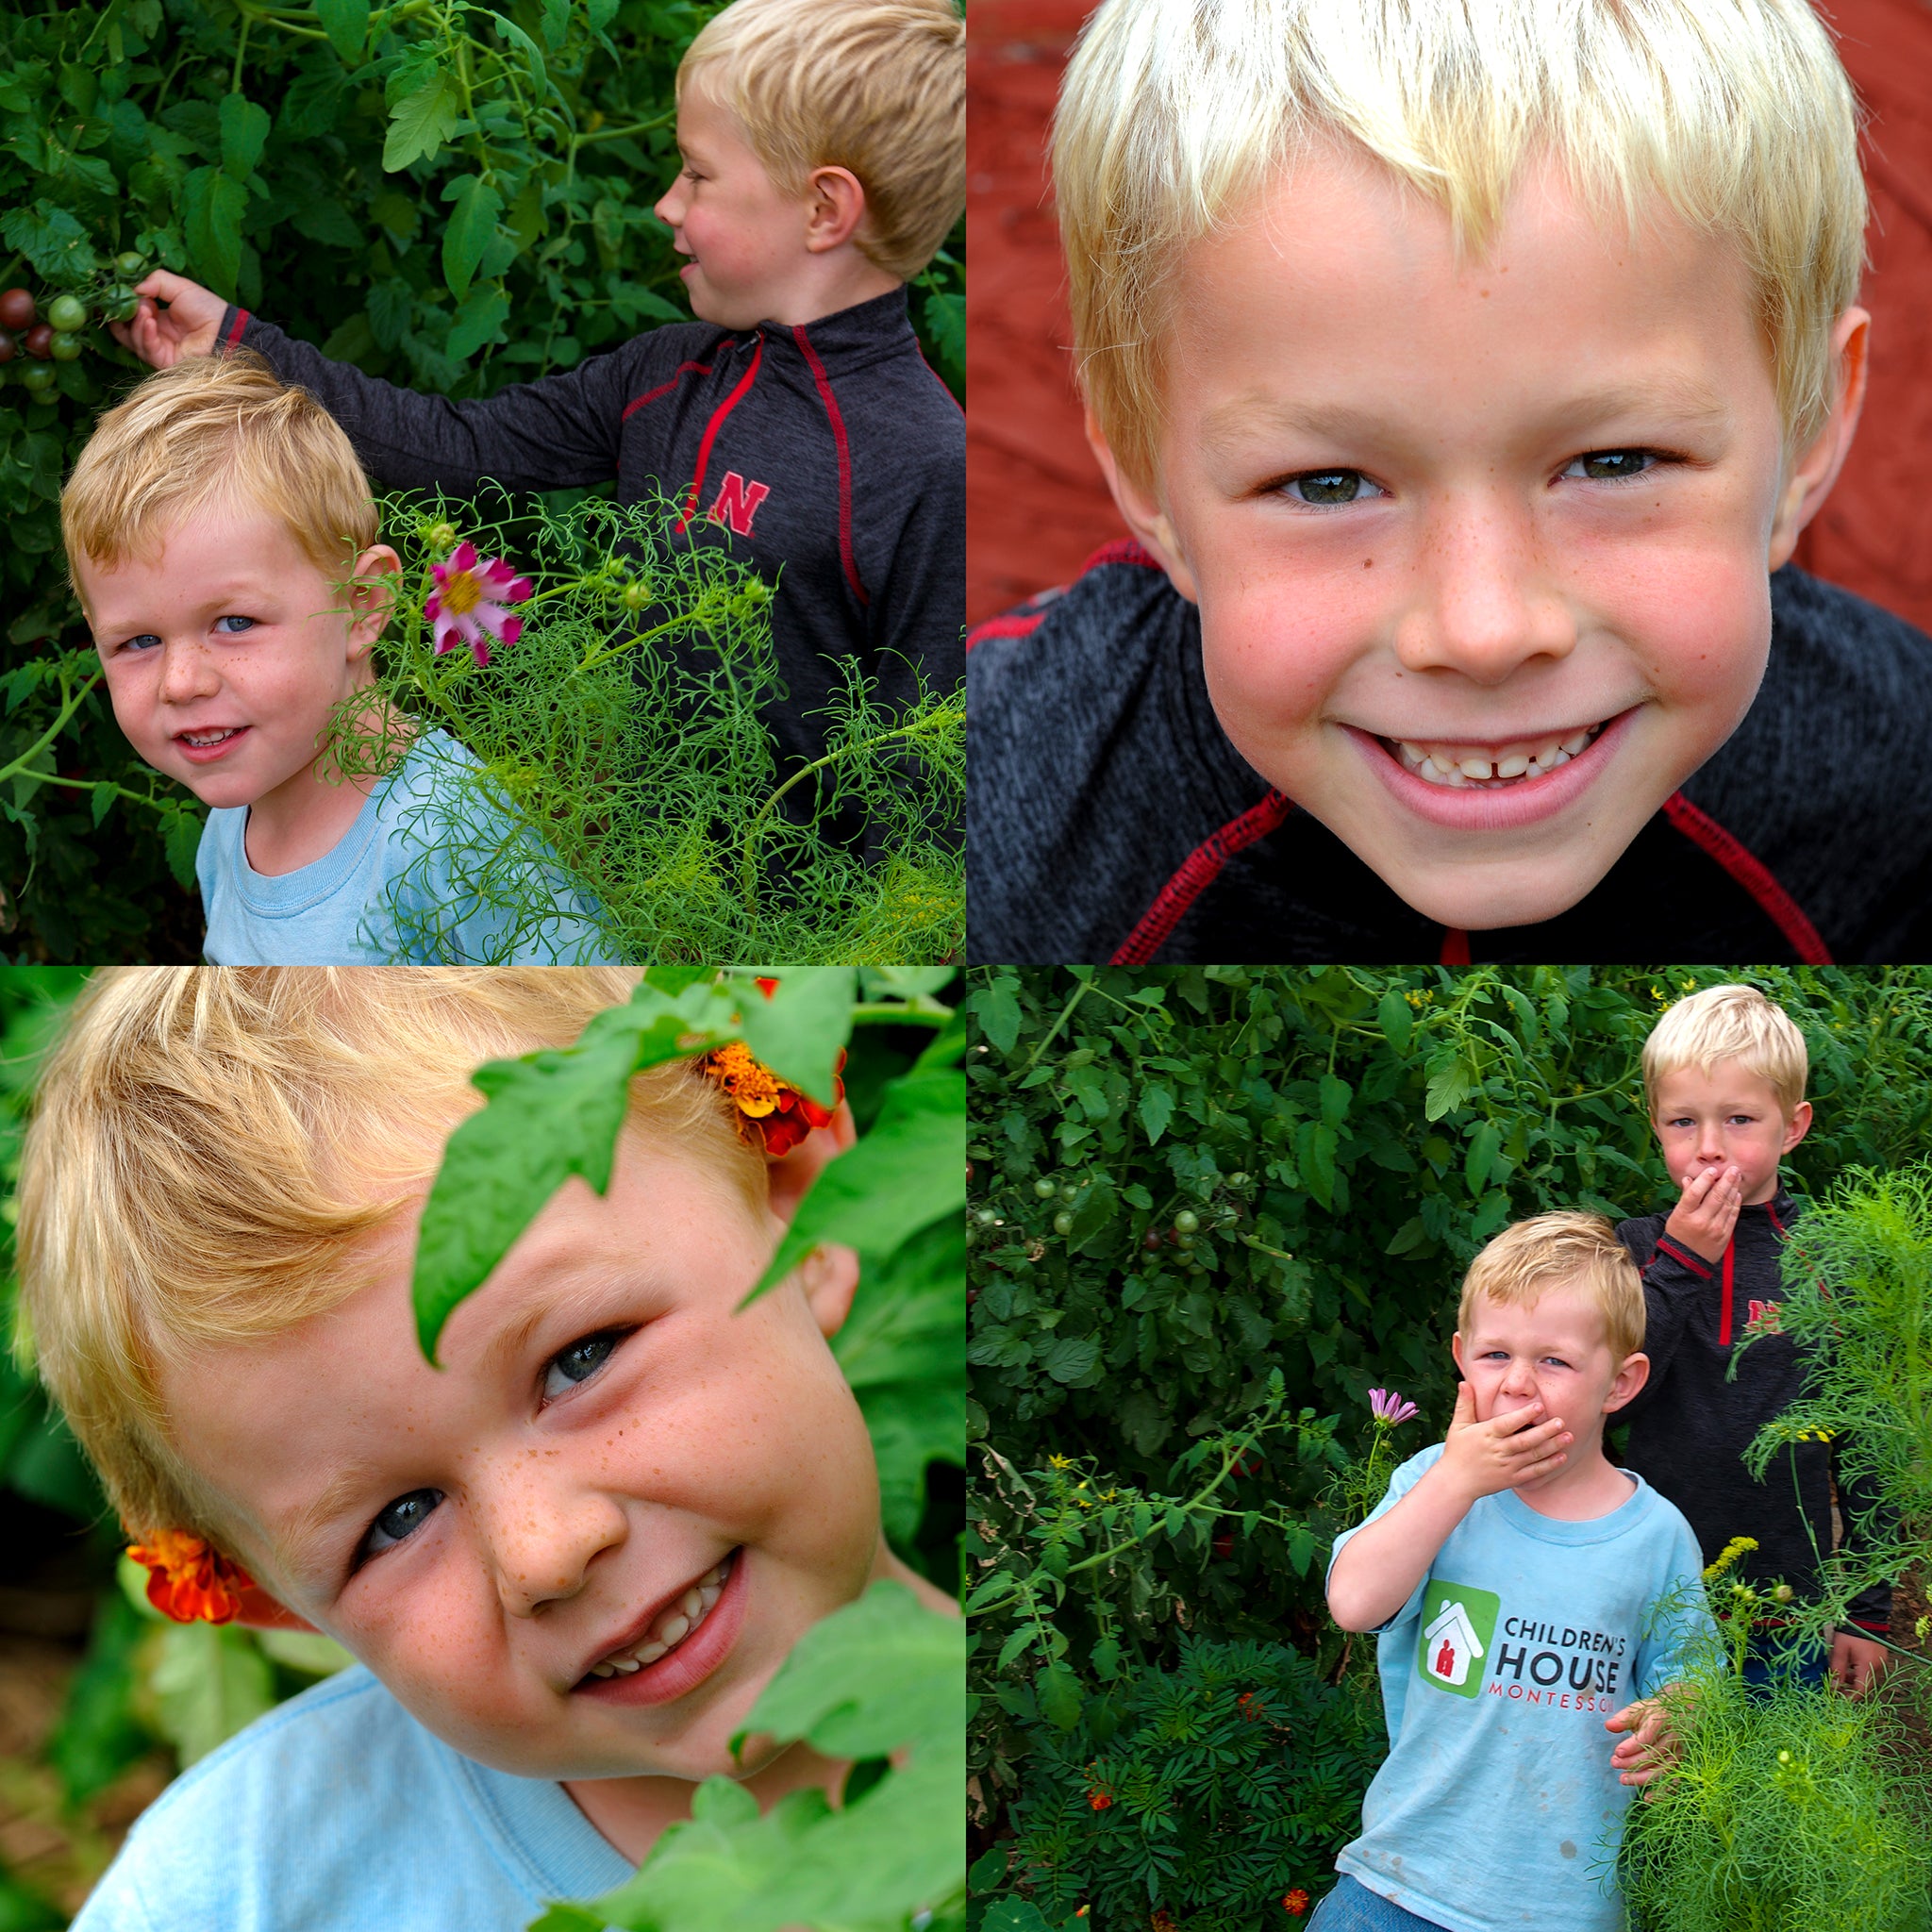 Collage of the Jones children standing among plants in a greenhouse